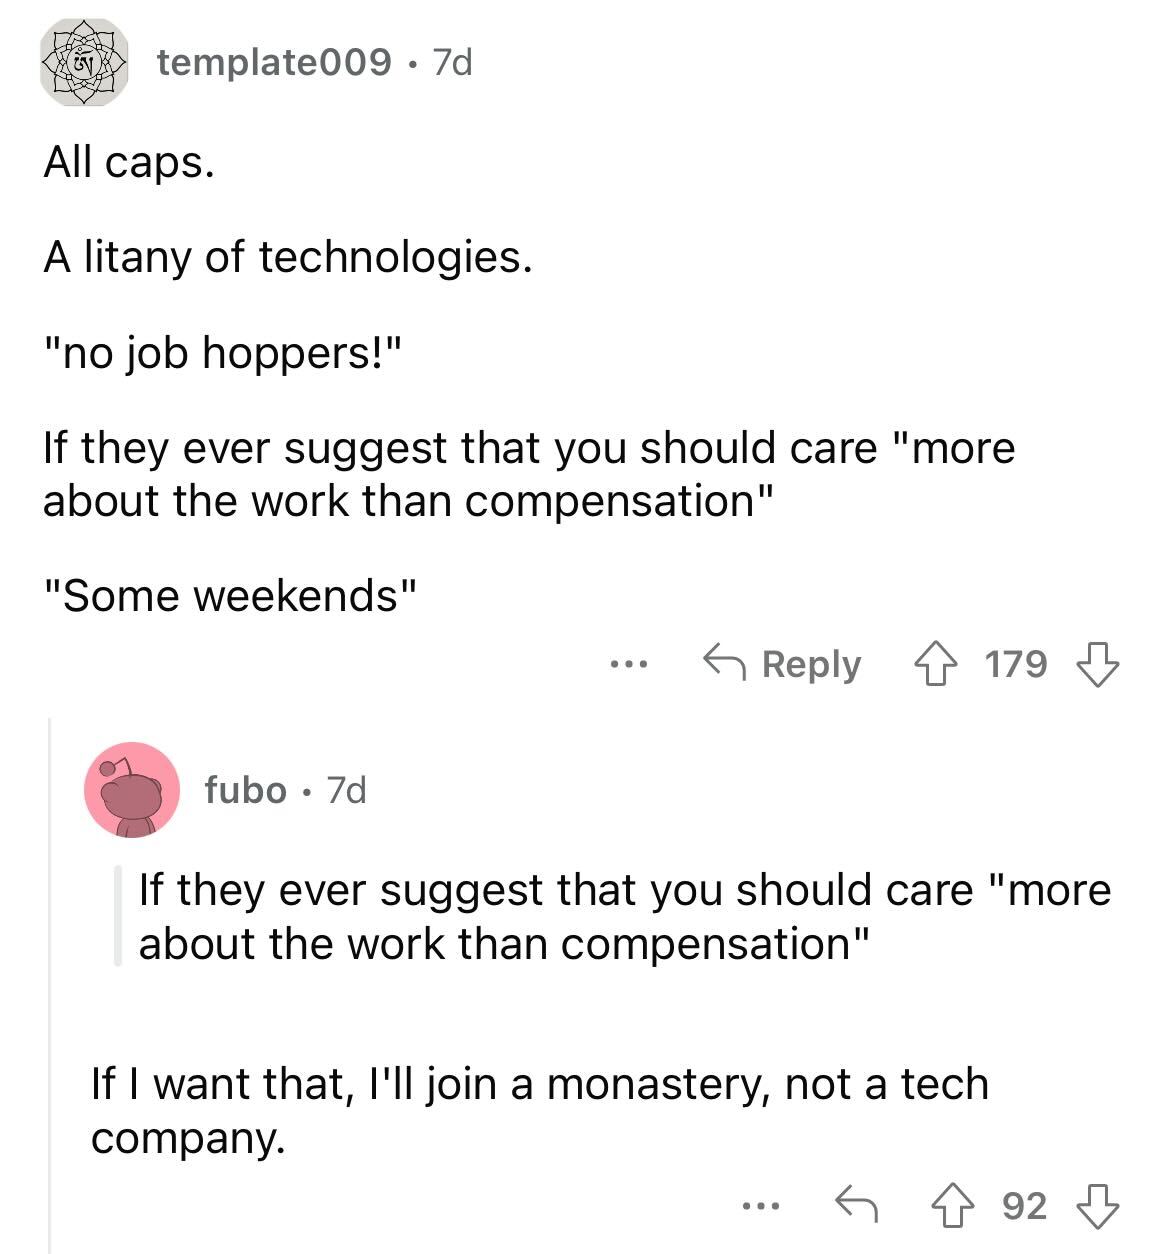 job posting red flags you should avoid - angle - template009. 7d All caps. A litany of technologies. "no job hoppers!" If they ever suggest that you should care "more about the work than compensation" "Some weekends" fubo 7d ... 179 If they ever suggest t